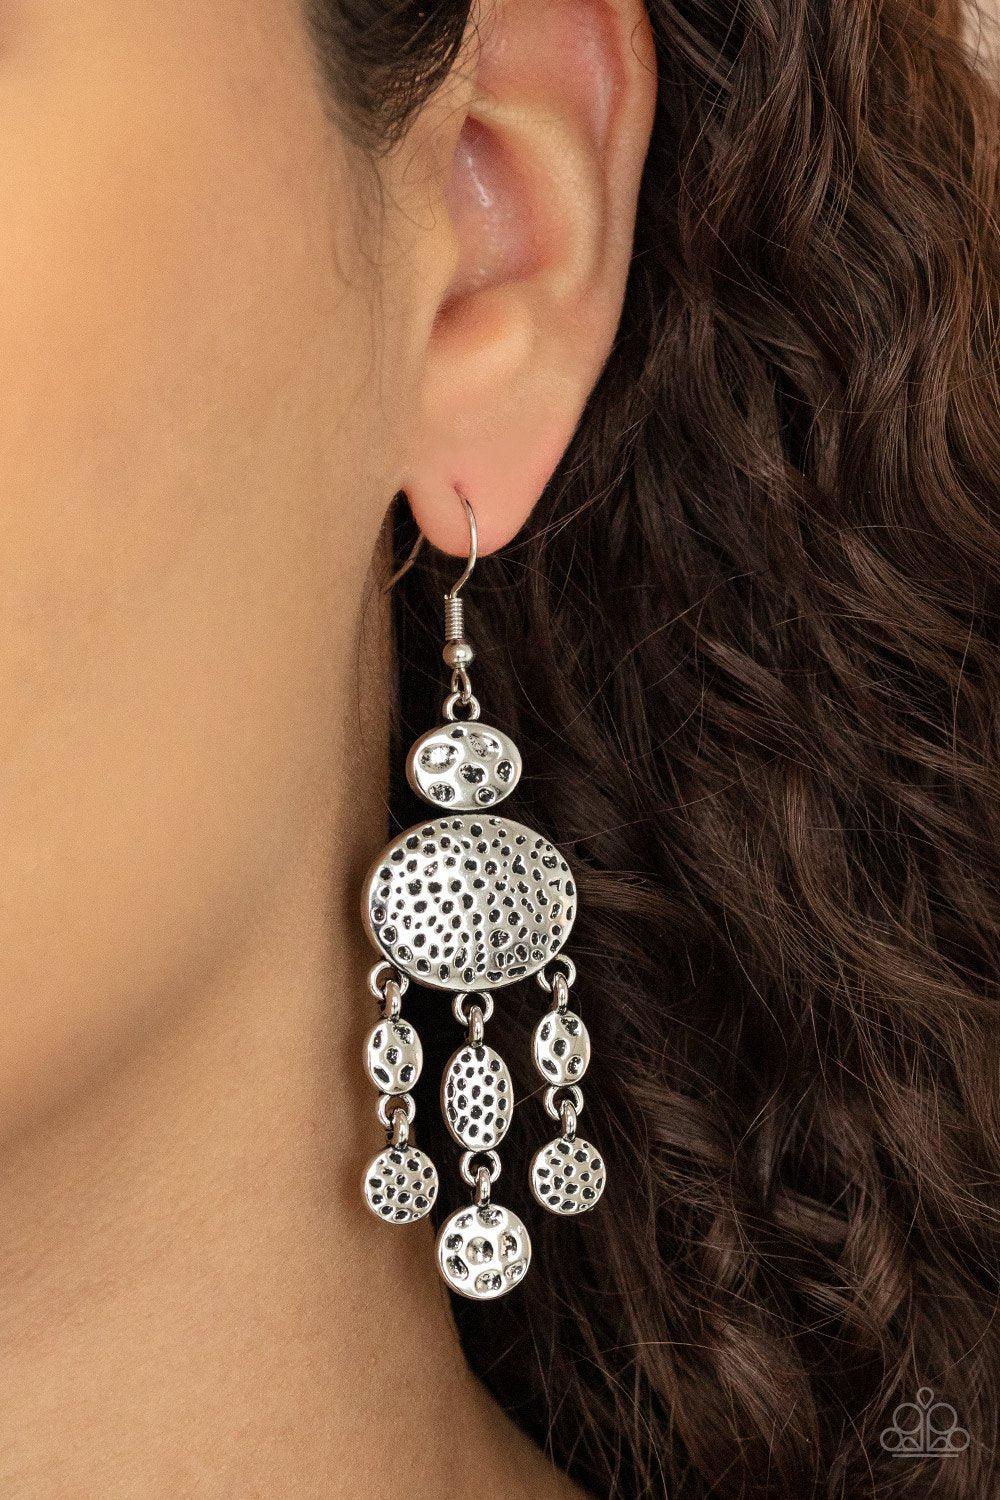 Get Your ARTIFACTS Straight Silver Earrings - Paparazzi Accessories- model - CarasShop.com - $5 Jewelry by Cara Jewels